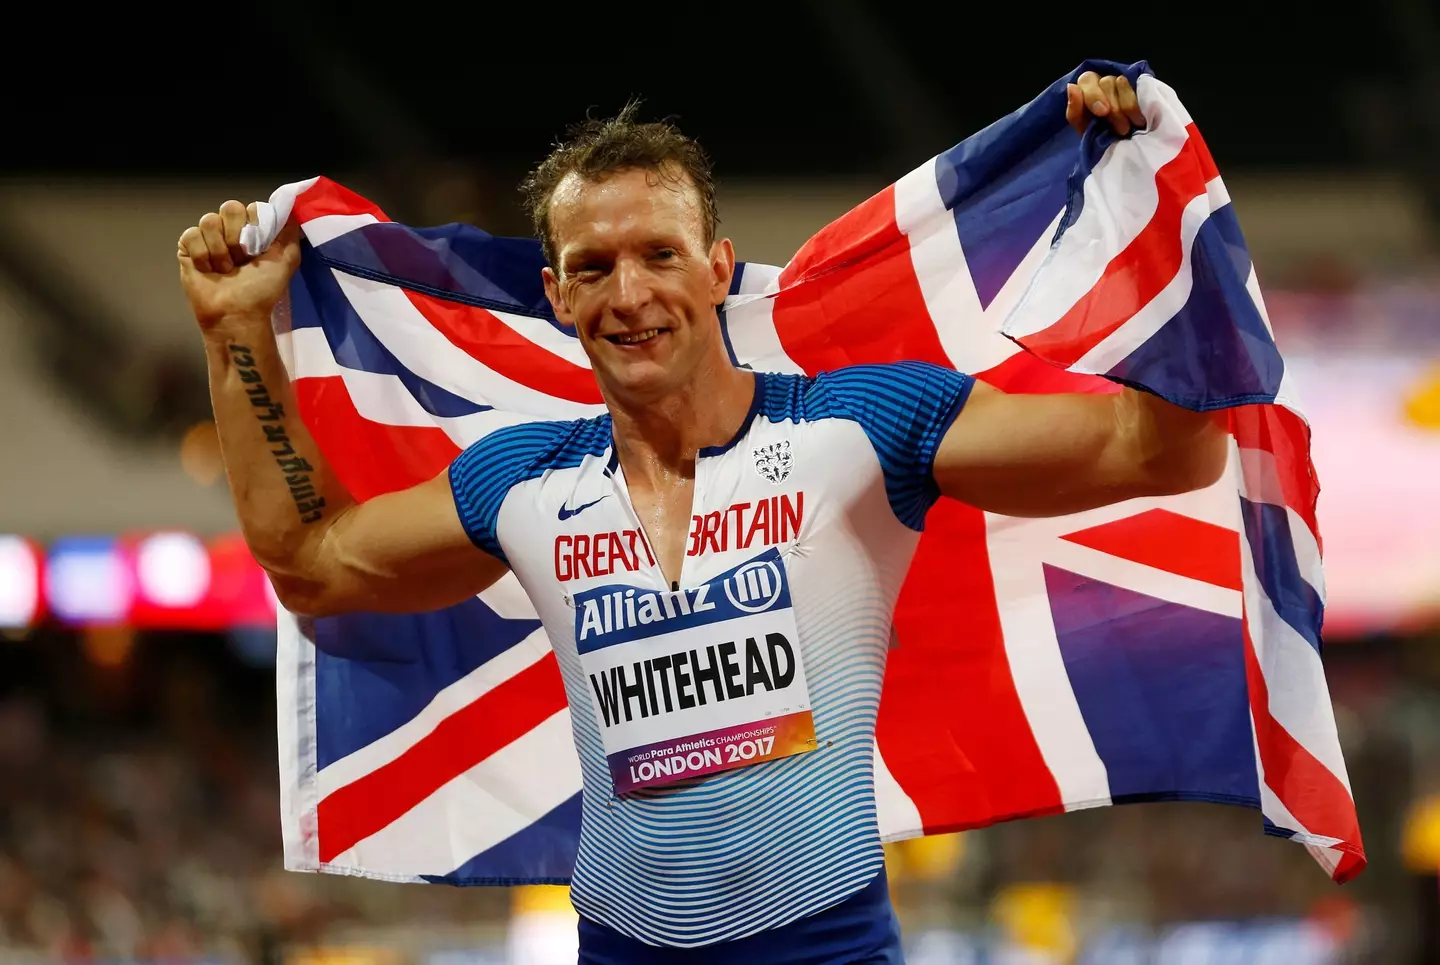 British Paralympian Richard Whitehead has made harrowing claims about the behaviour of Russian athletes (Image: PA)